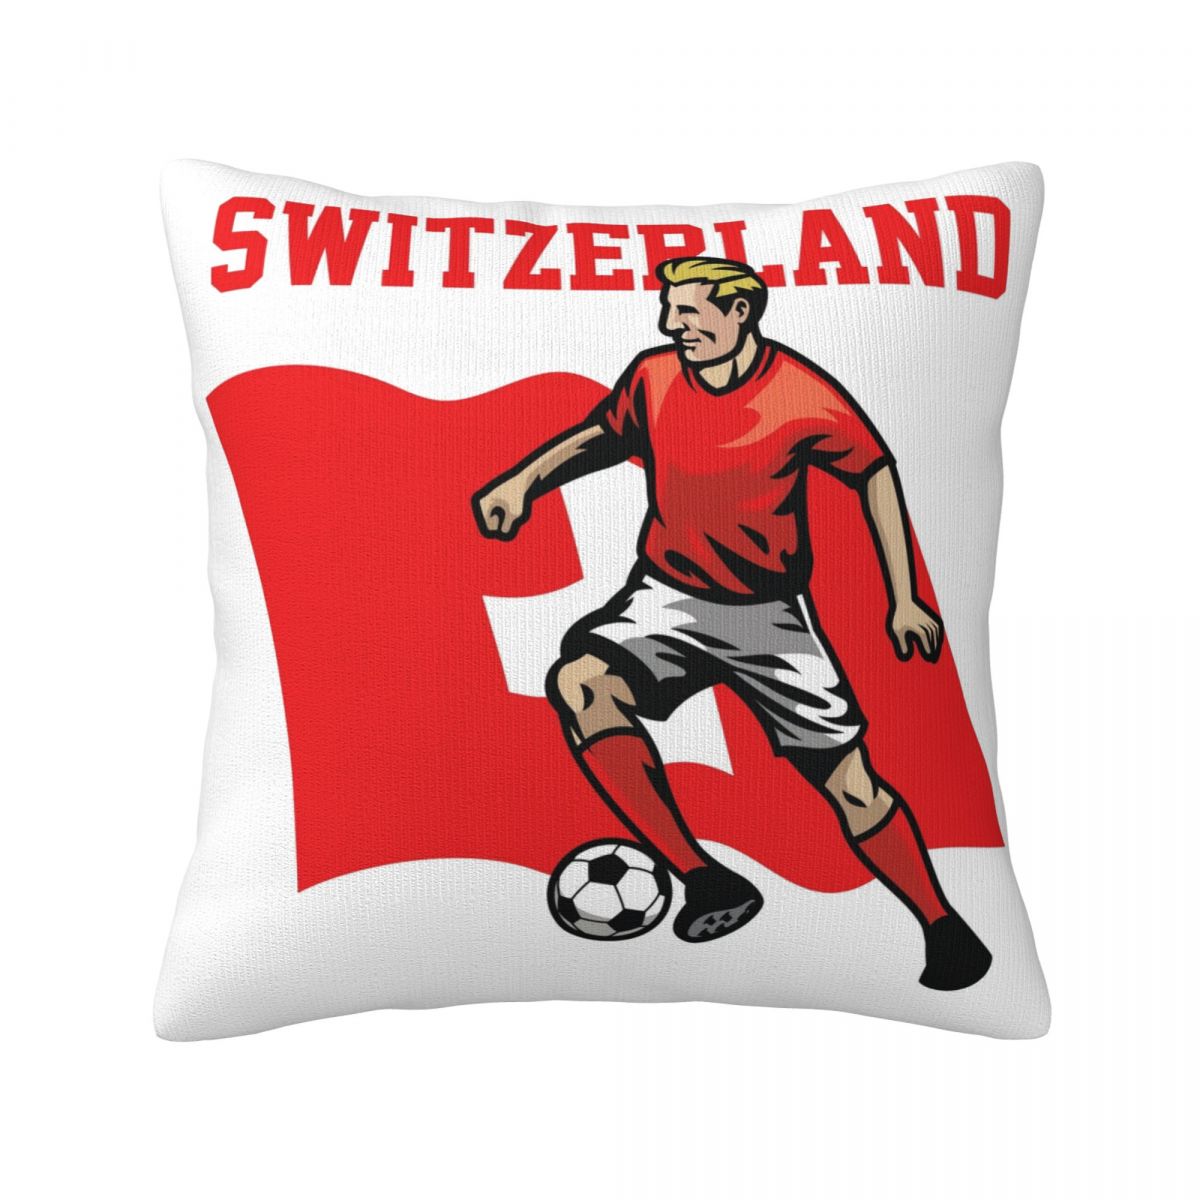 Switzerland Soccer Player Throw Pillow Covers 18x18